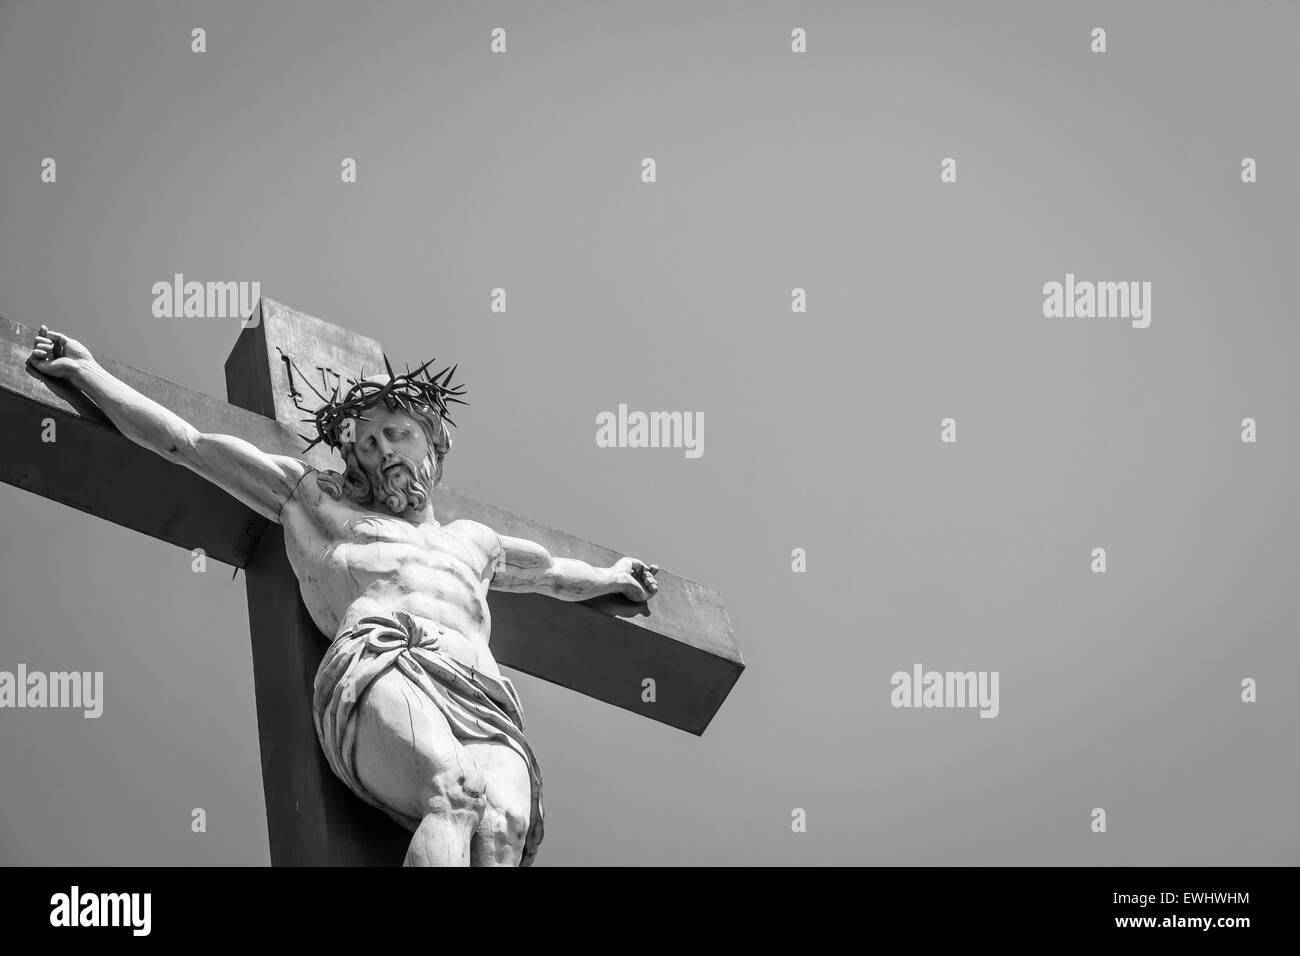 Crucifix made of marble with blue sky in background. France, Provence Region. Stock Photo